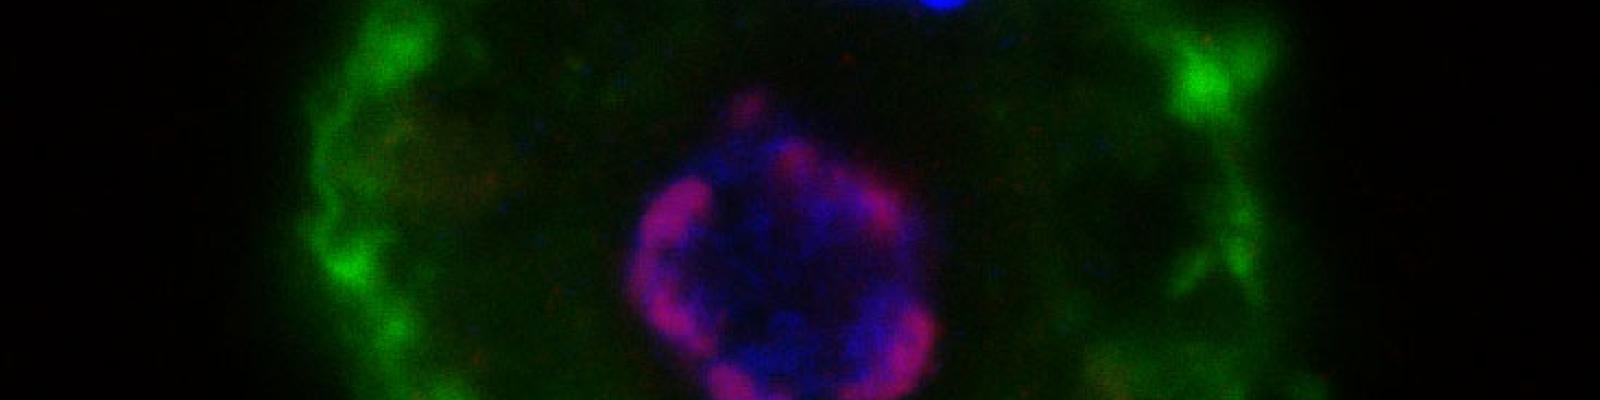 A macrophage infected with ASFV